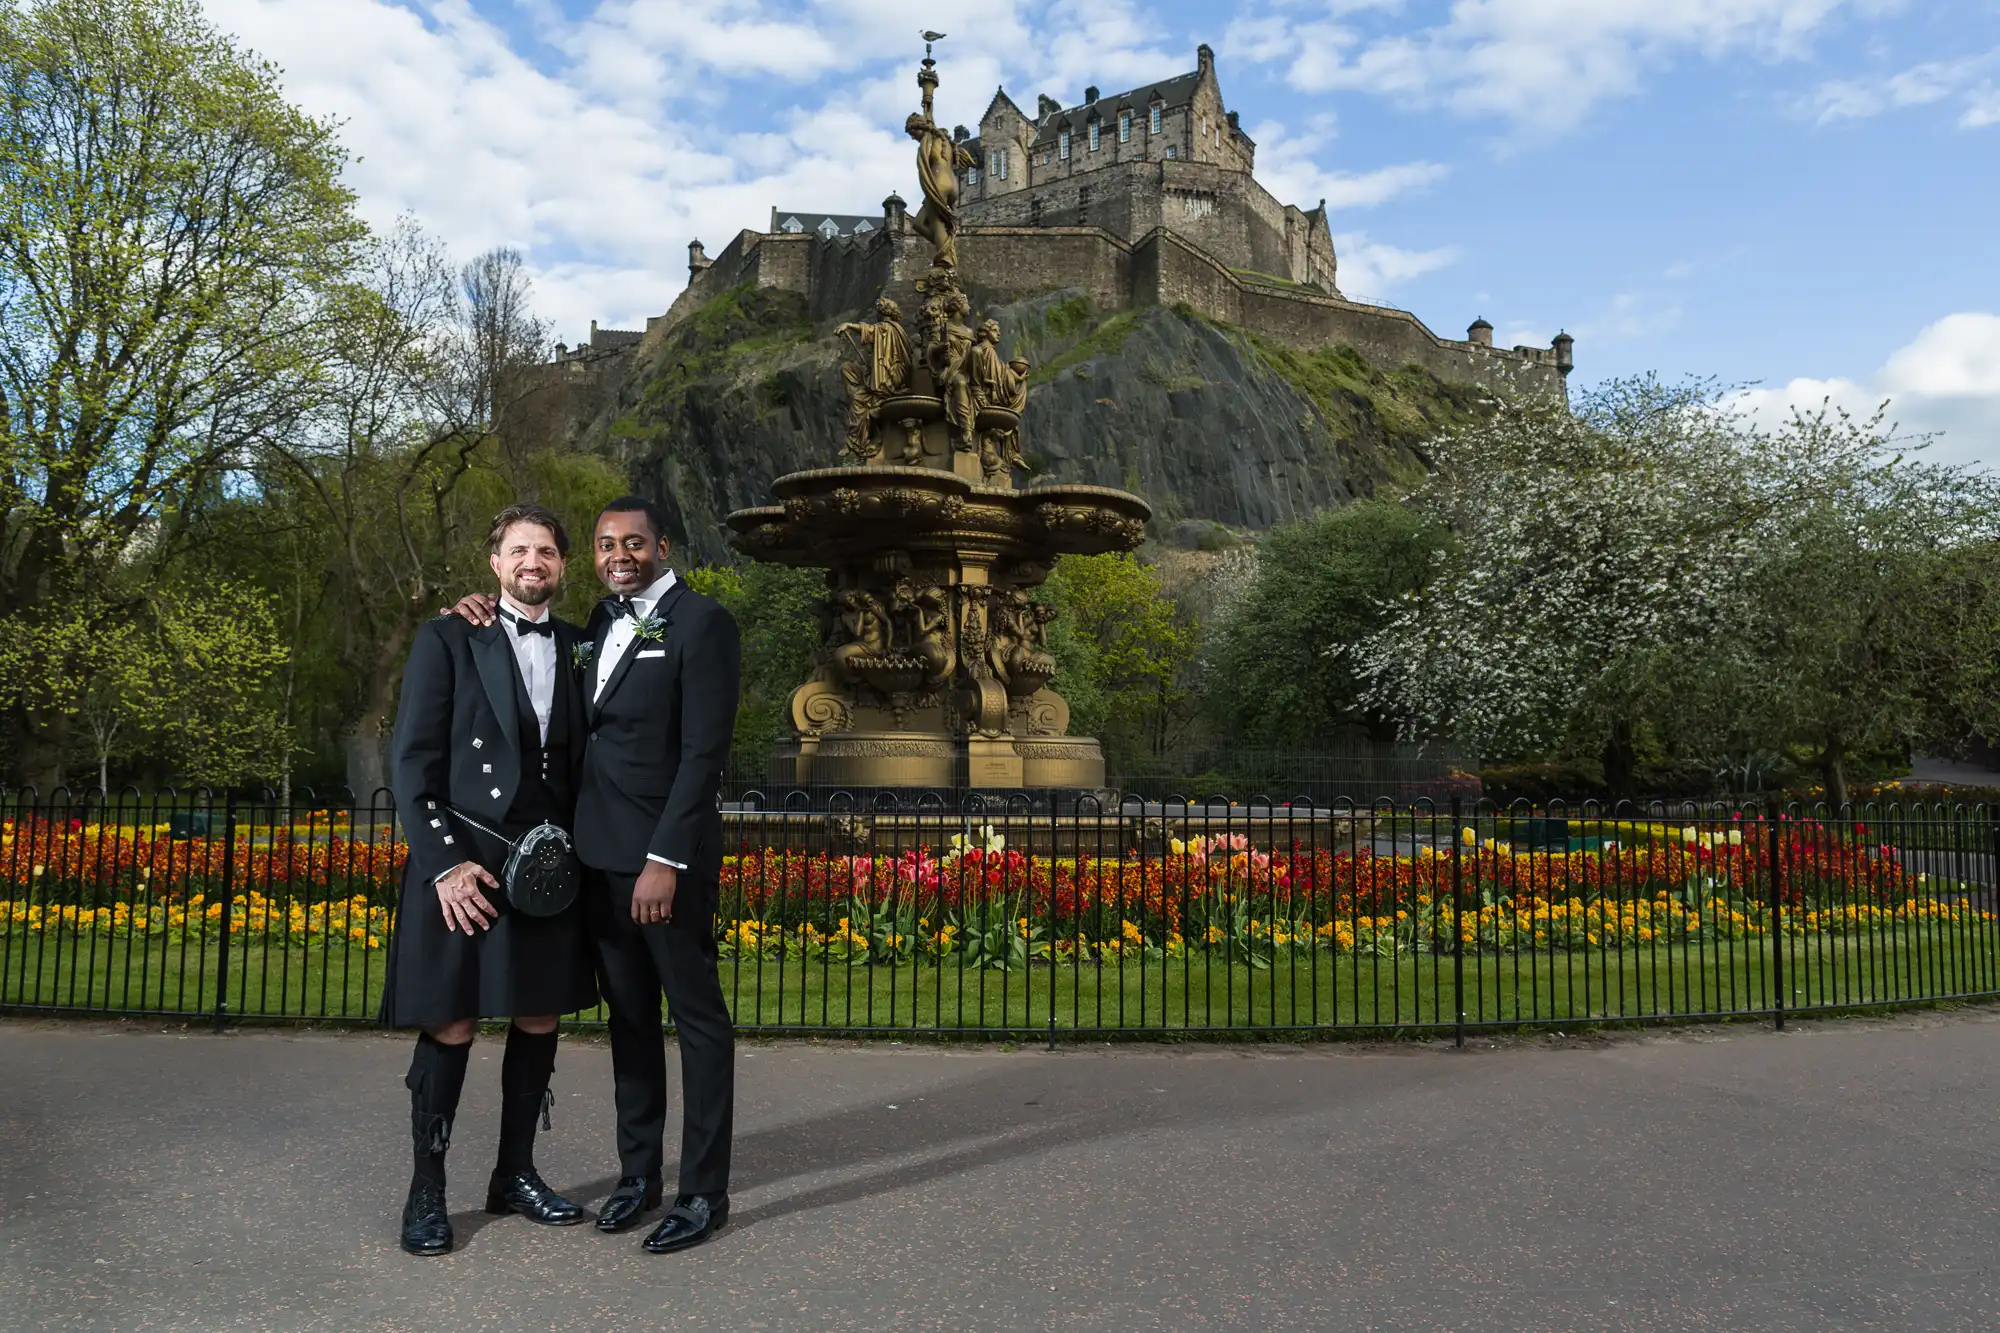 Two grooms, one in a kilt and the other in a suit, stand arm-in-arm in front of a fountain with Edinburgh Castle in the background. Vibrant flowers and trees surround the scene.